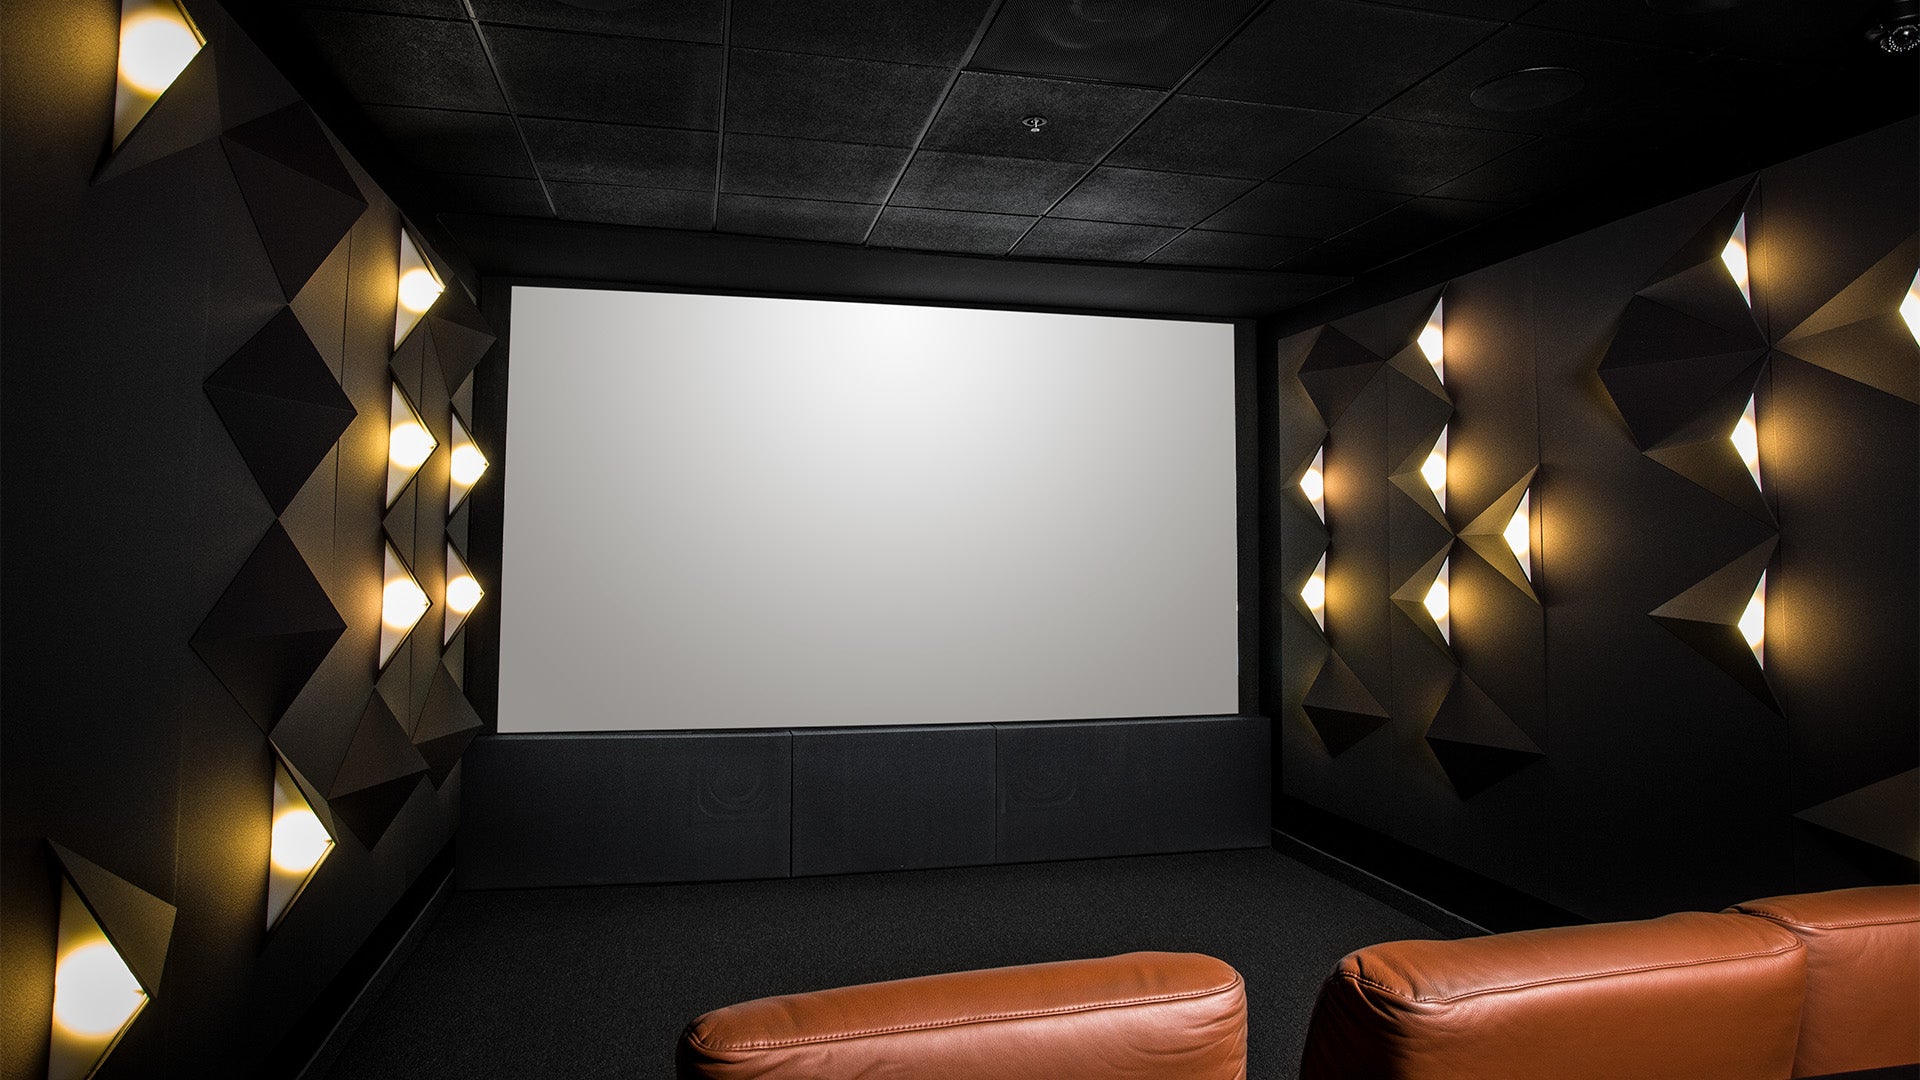 High-end home theater room facing large blank screen with brown leather chairs.